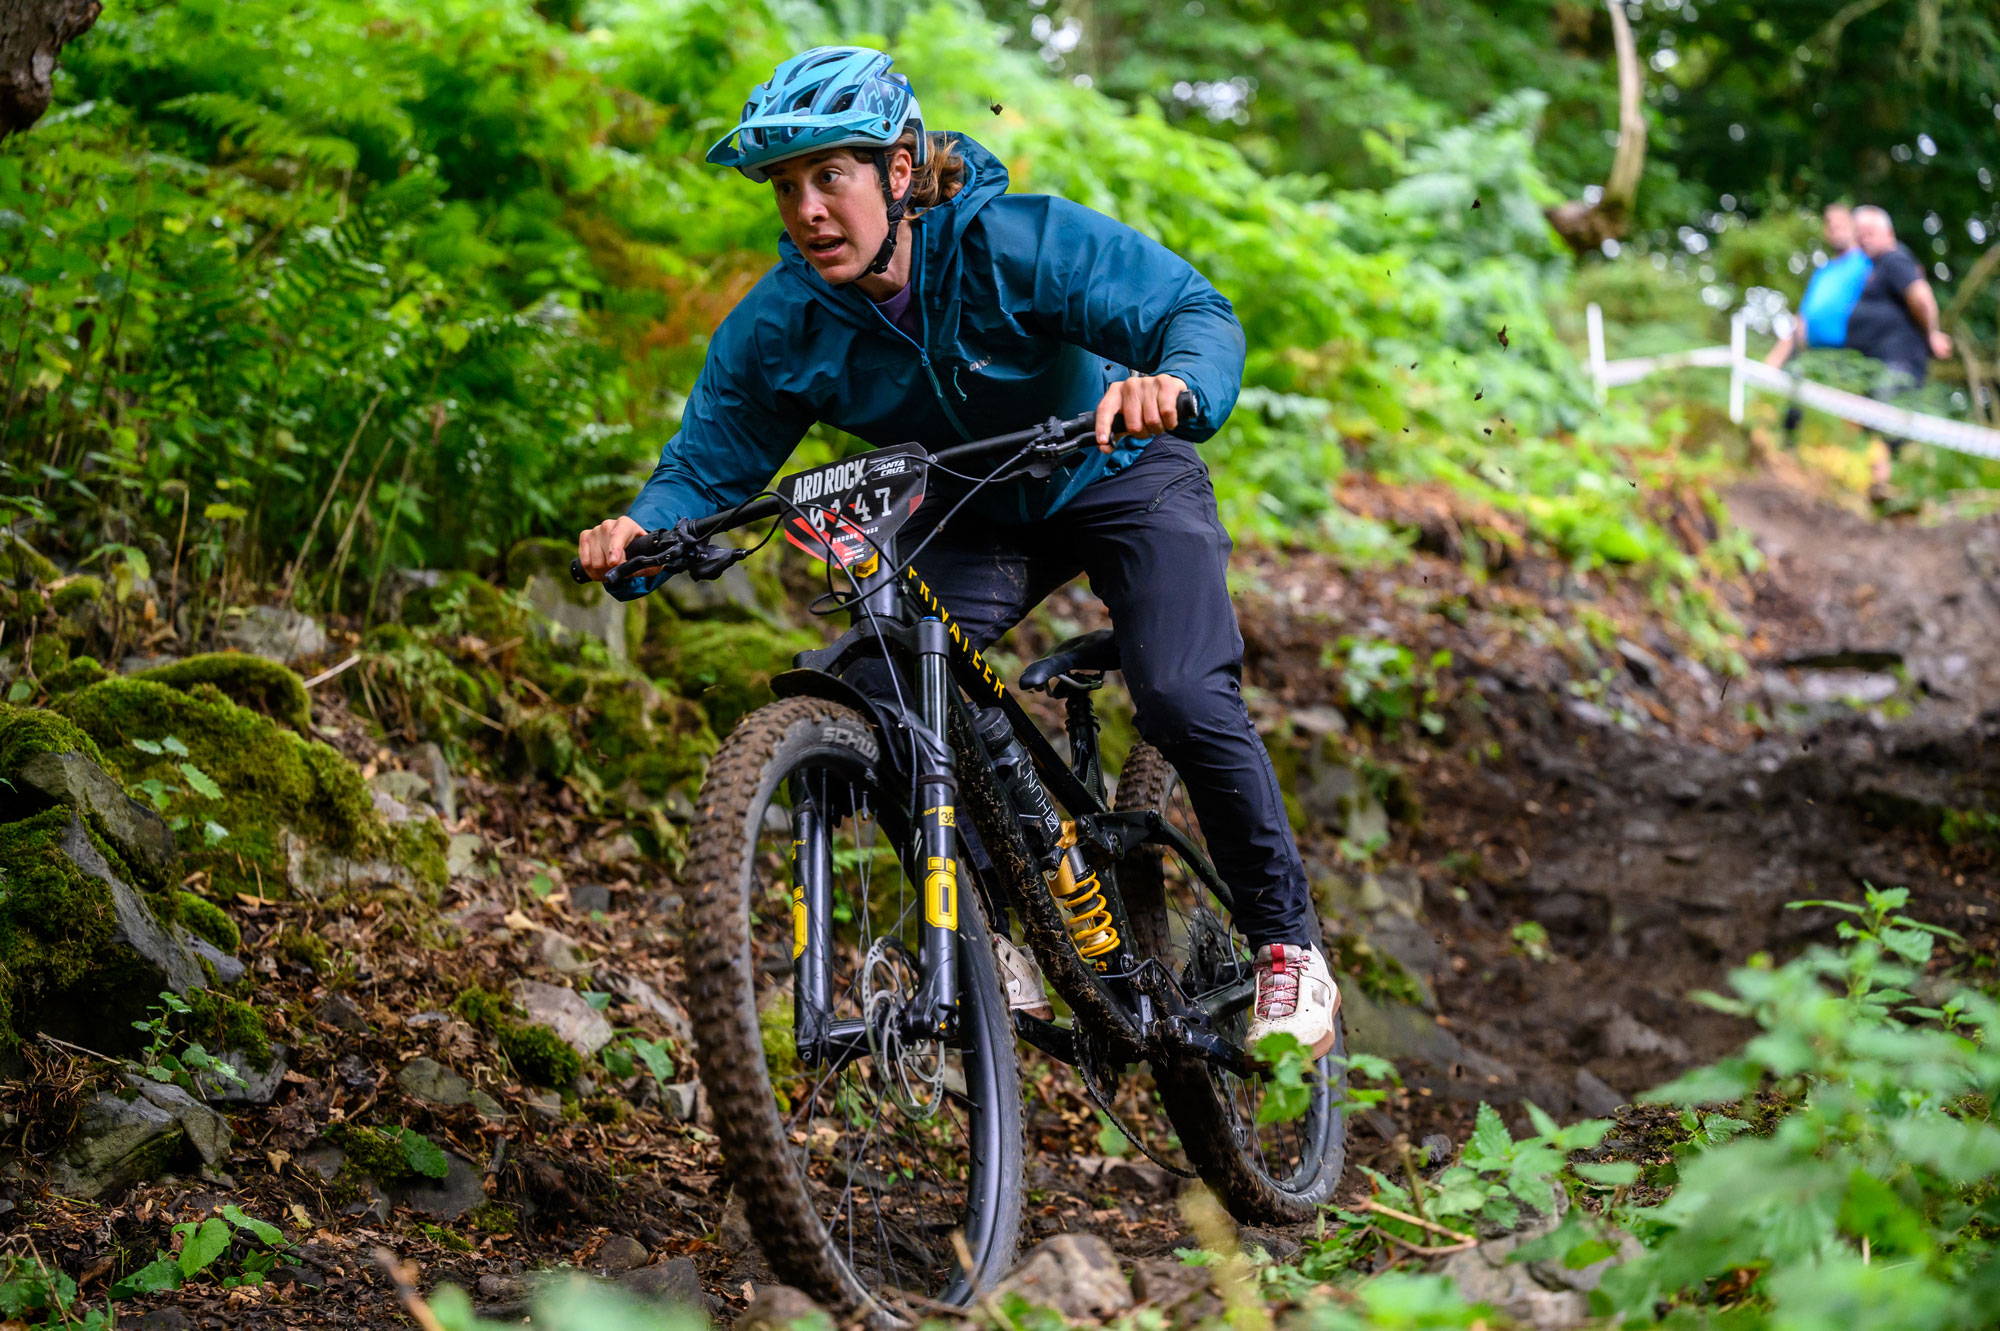 Katy Curd riding the Privateer Mountain Bike